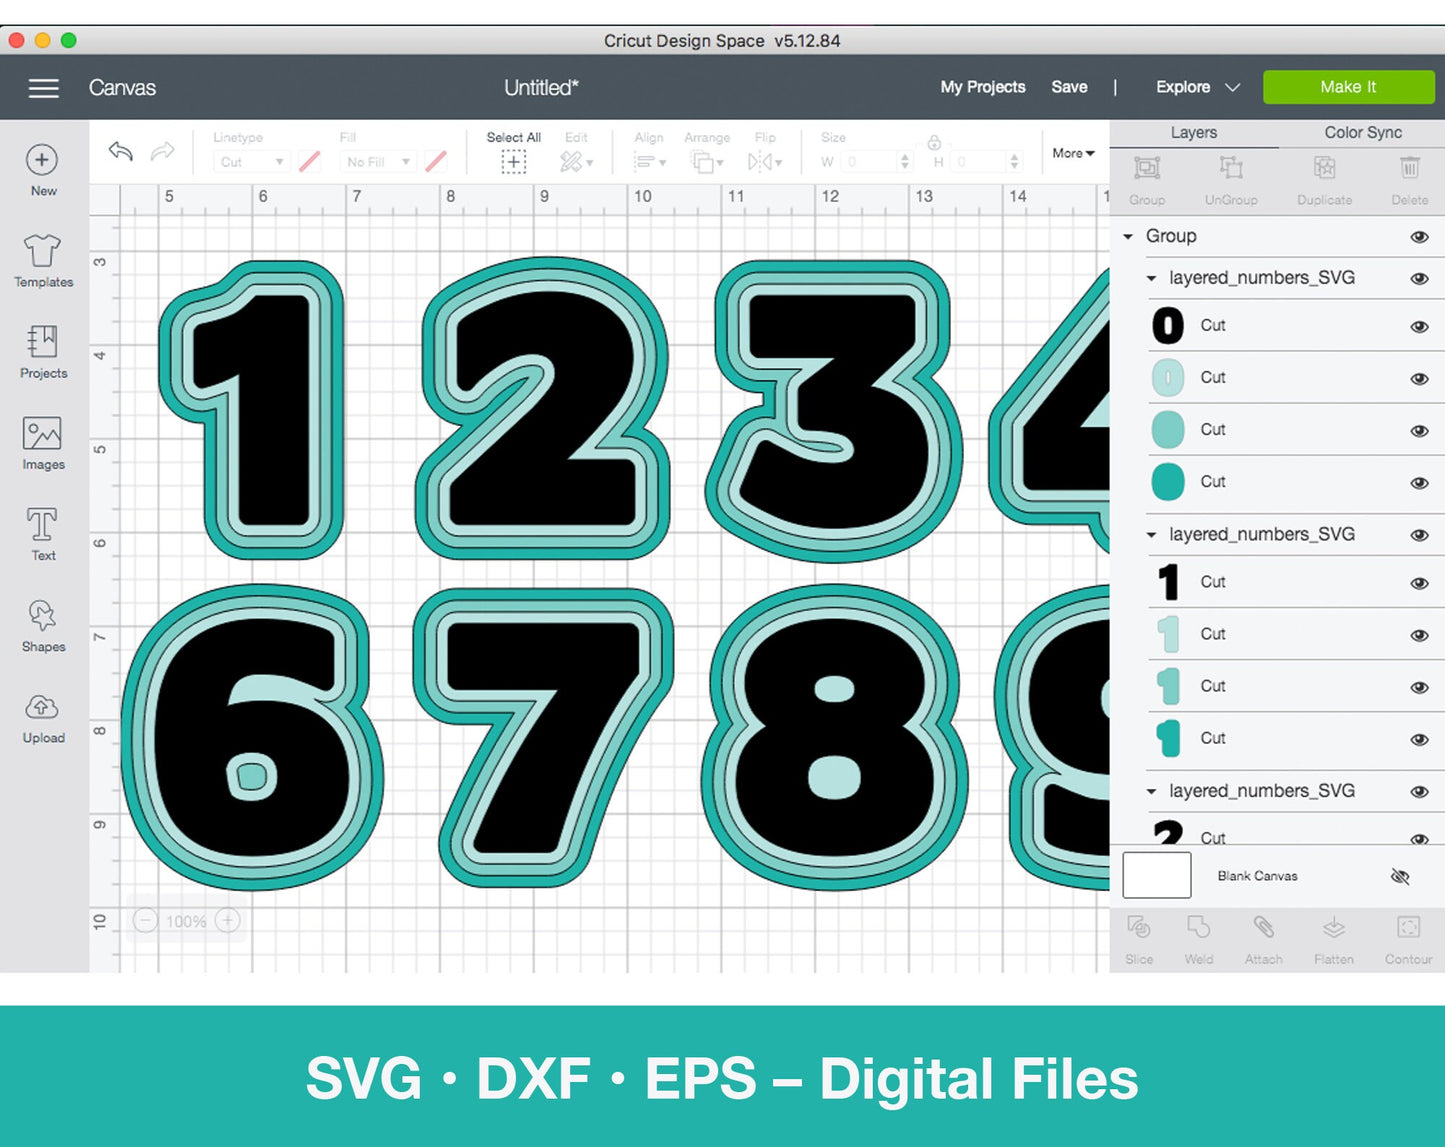 Layered SVG numbers 0 to 9